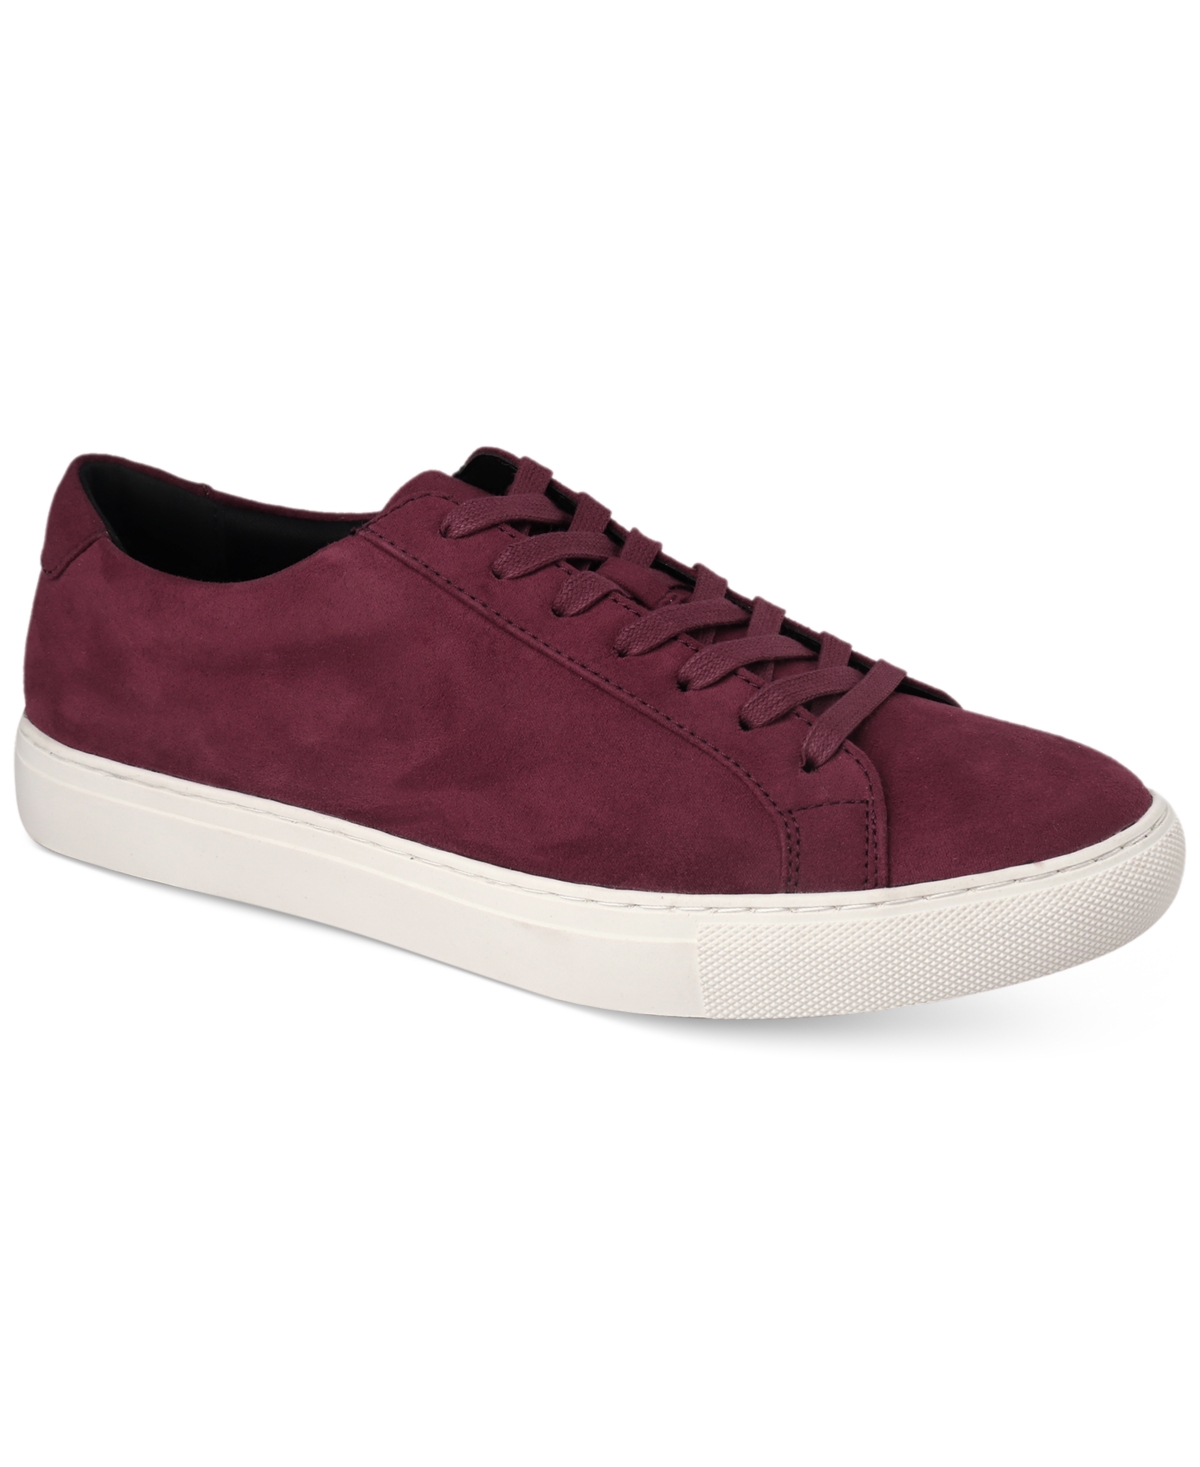 Men's Grayson Suede Lace-Up Sneakers, Created for Macy's - Nubuck PU in Burgundy